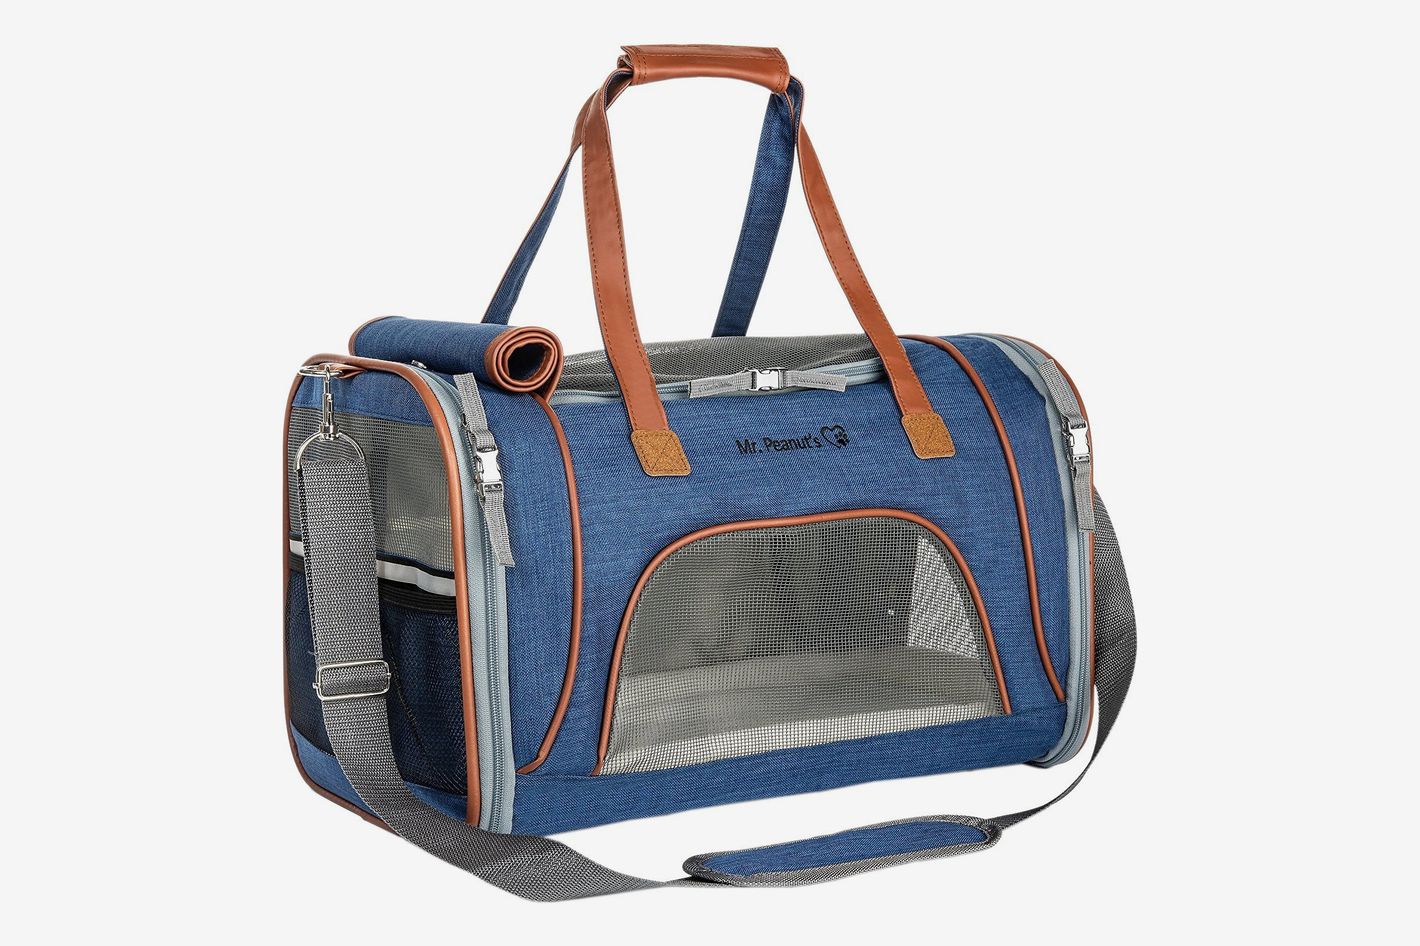 12 Best Pet Carriers 2023 for Traveling With Furry Friends